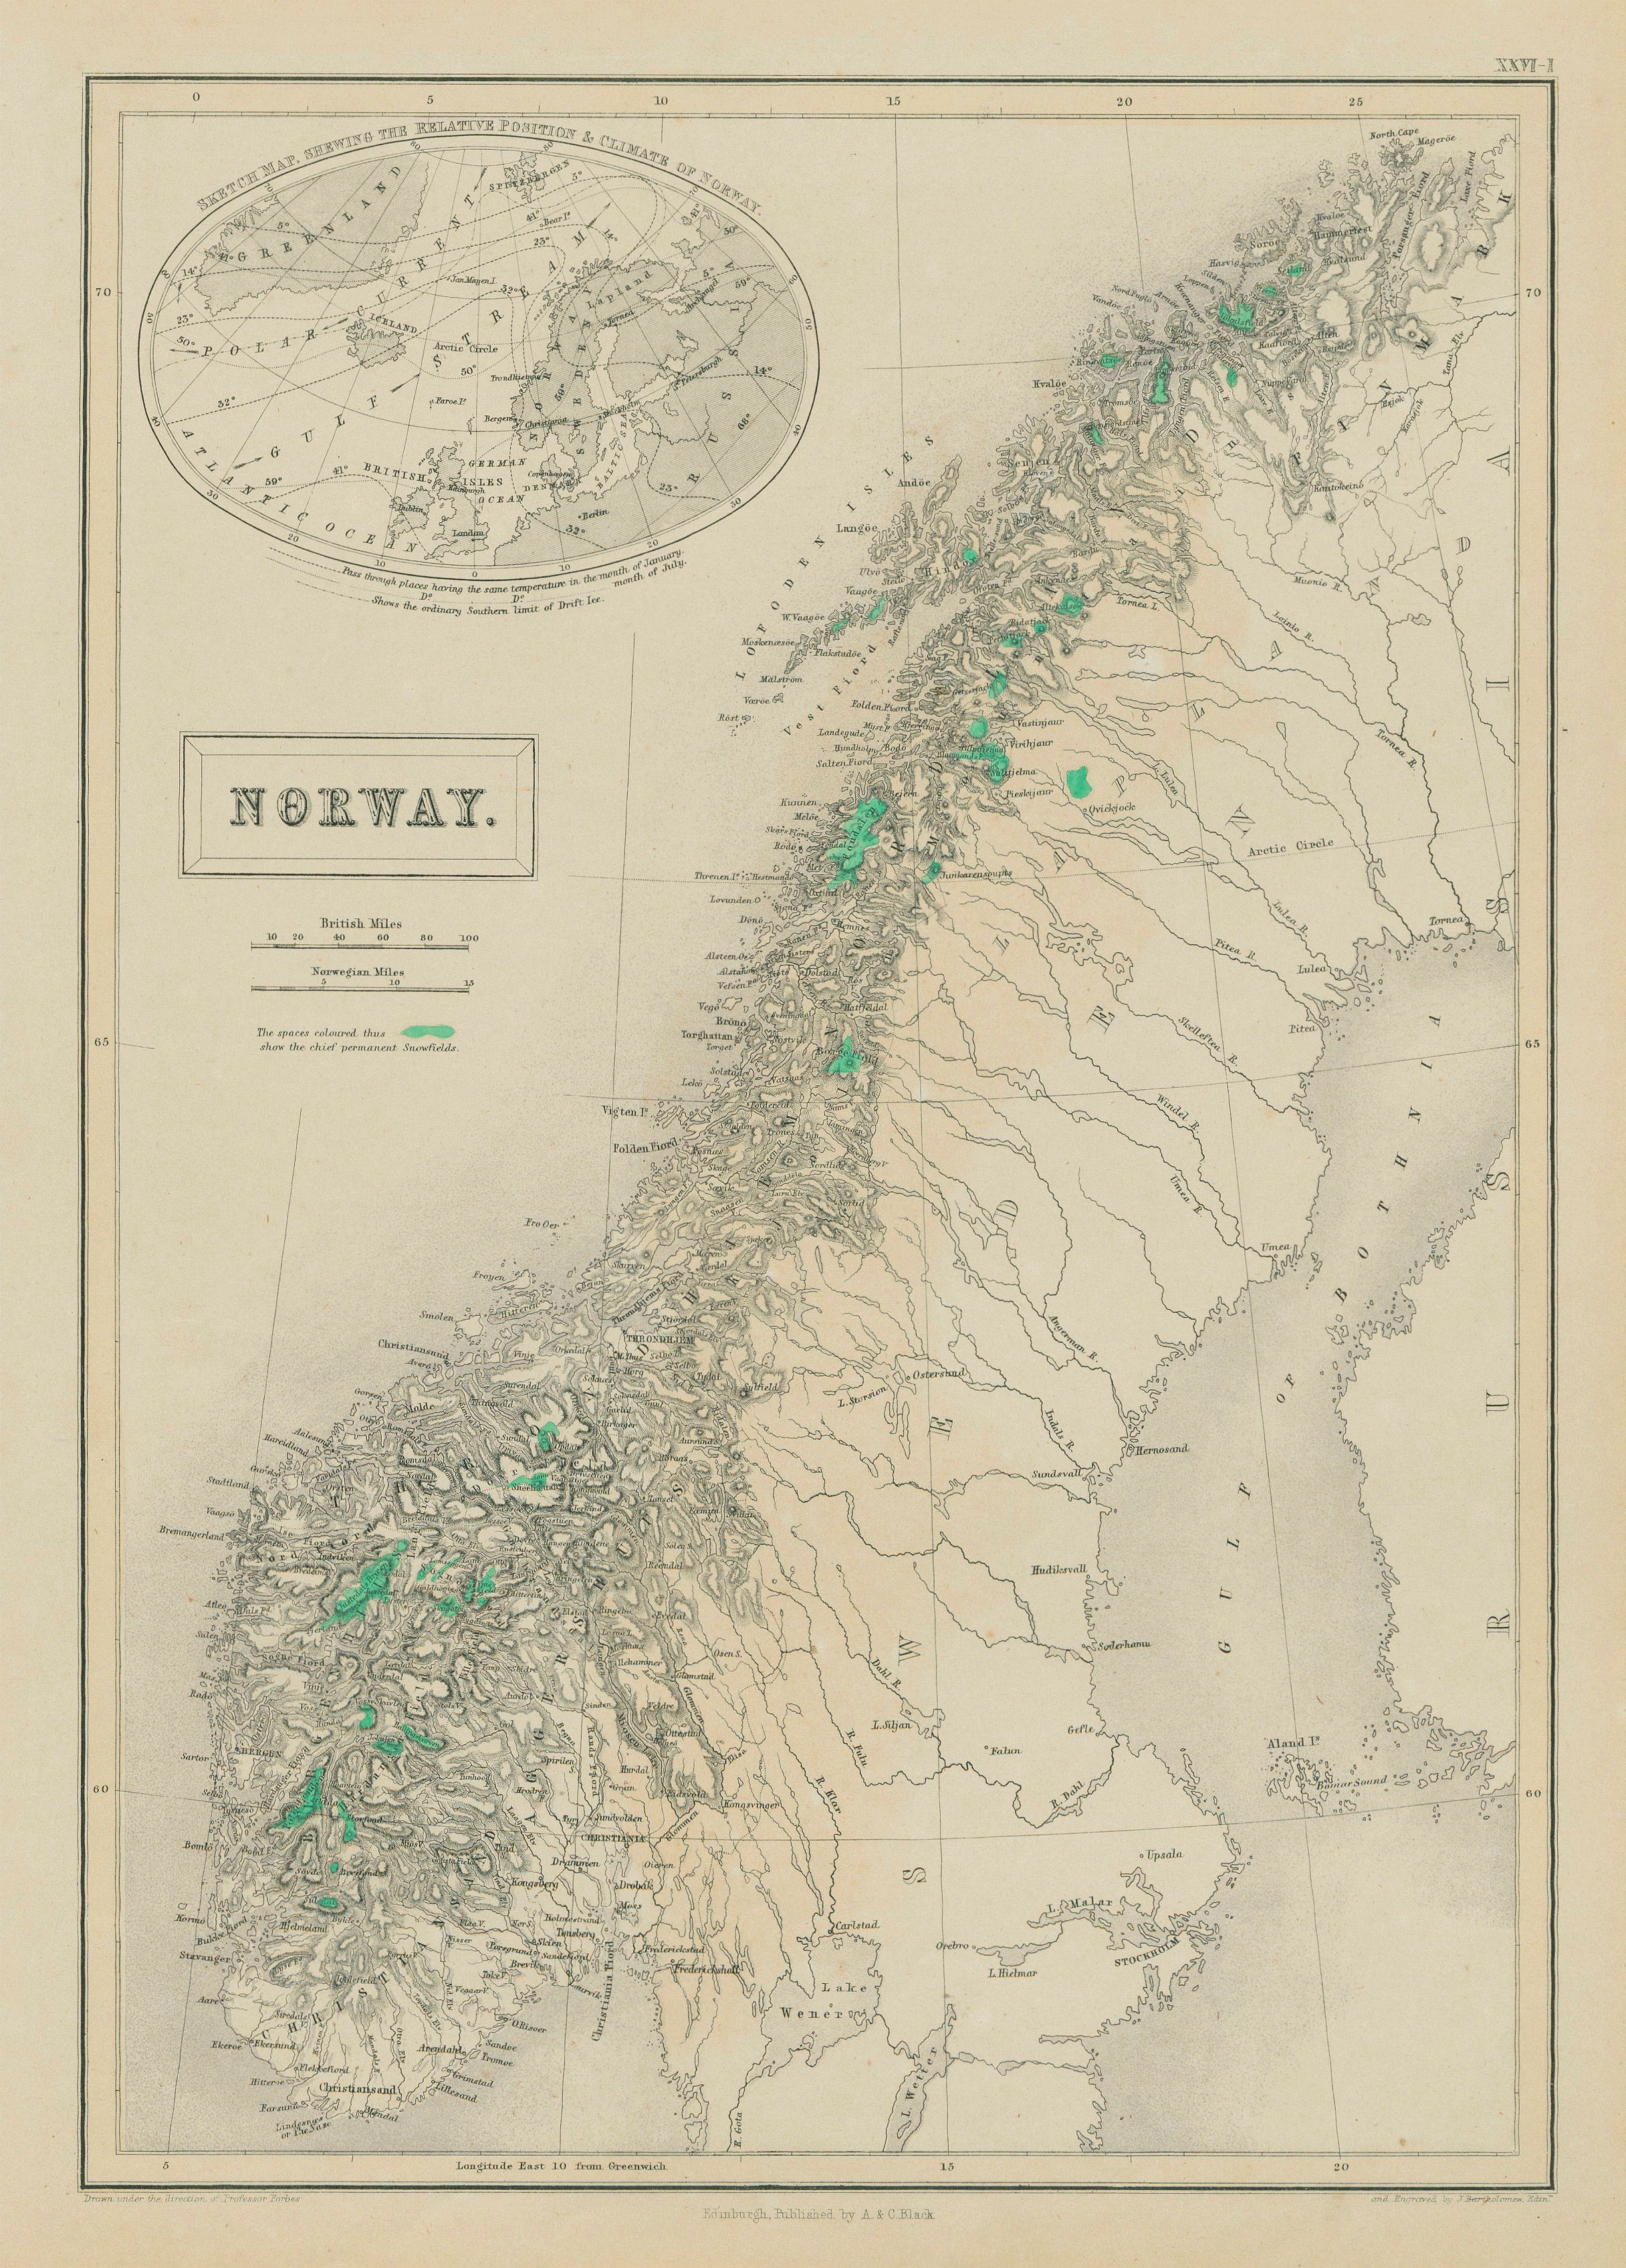 Associate Product Norway showing "permanent snowfields" (glaciers) in green. BARTHOLOMEW 1856 map